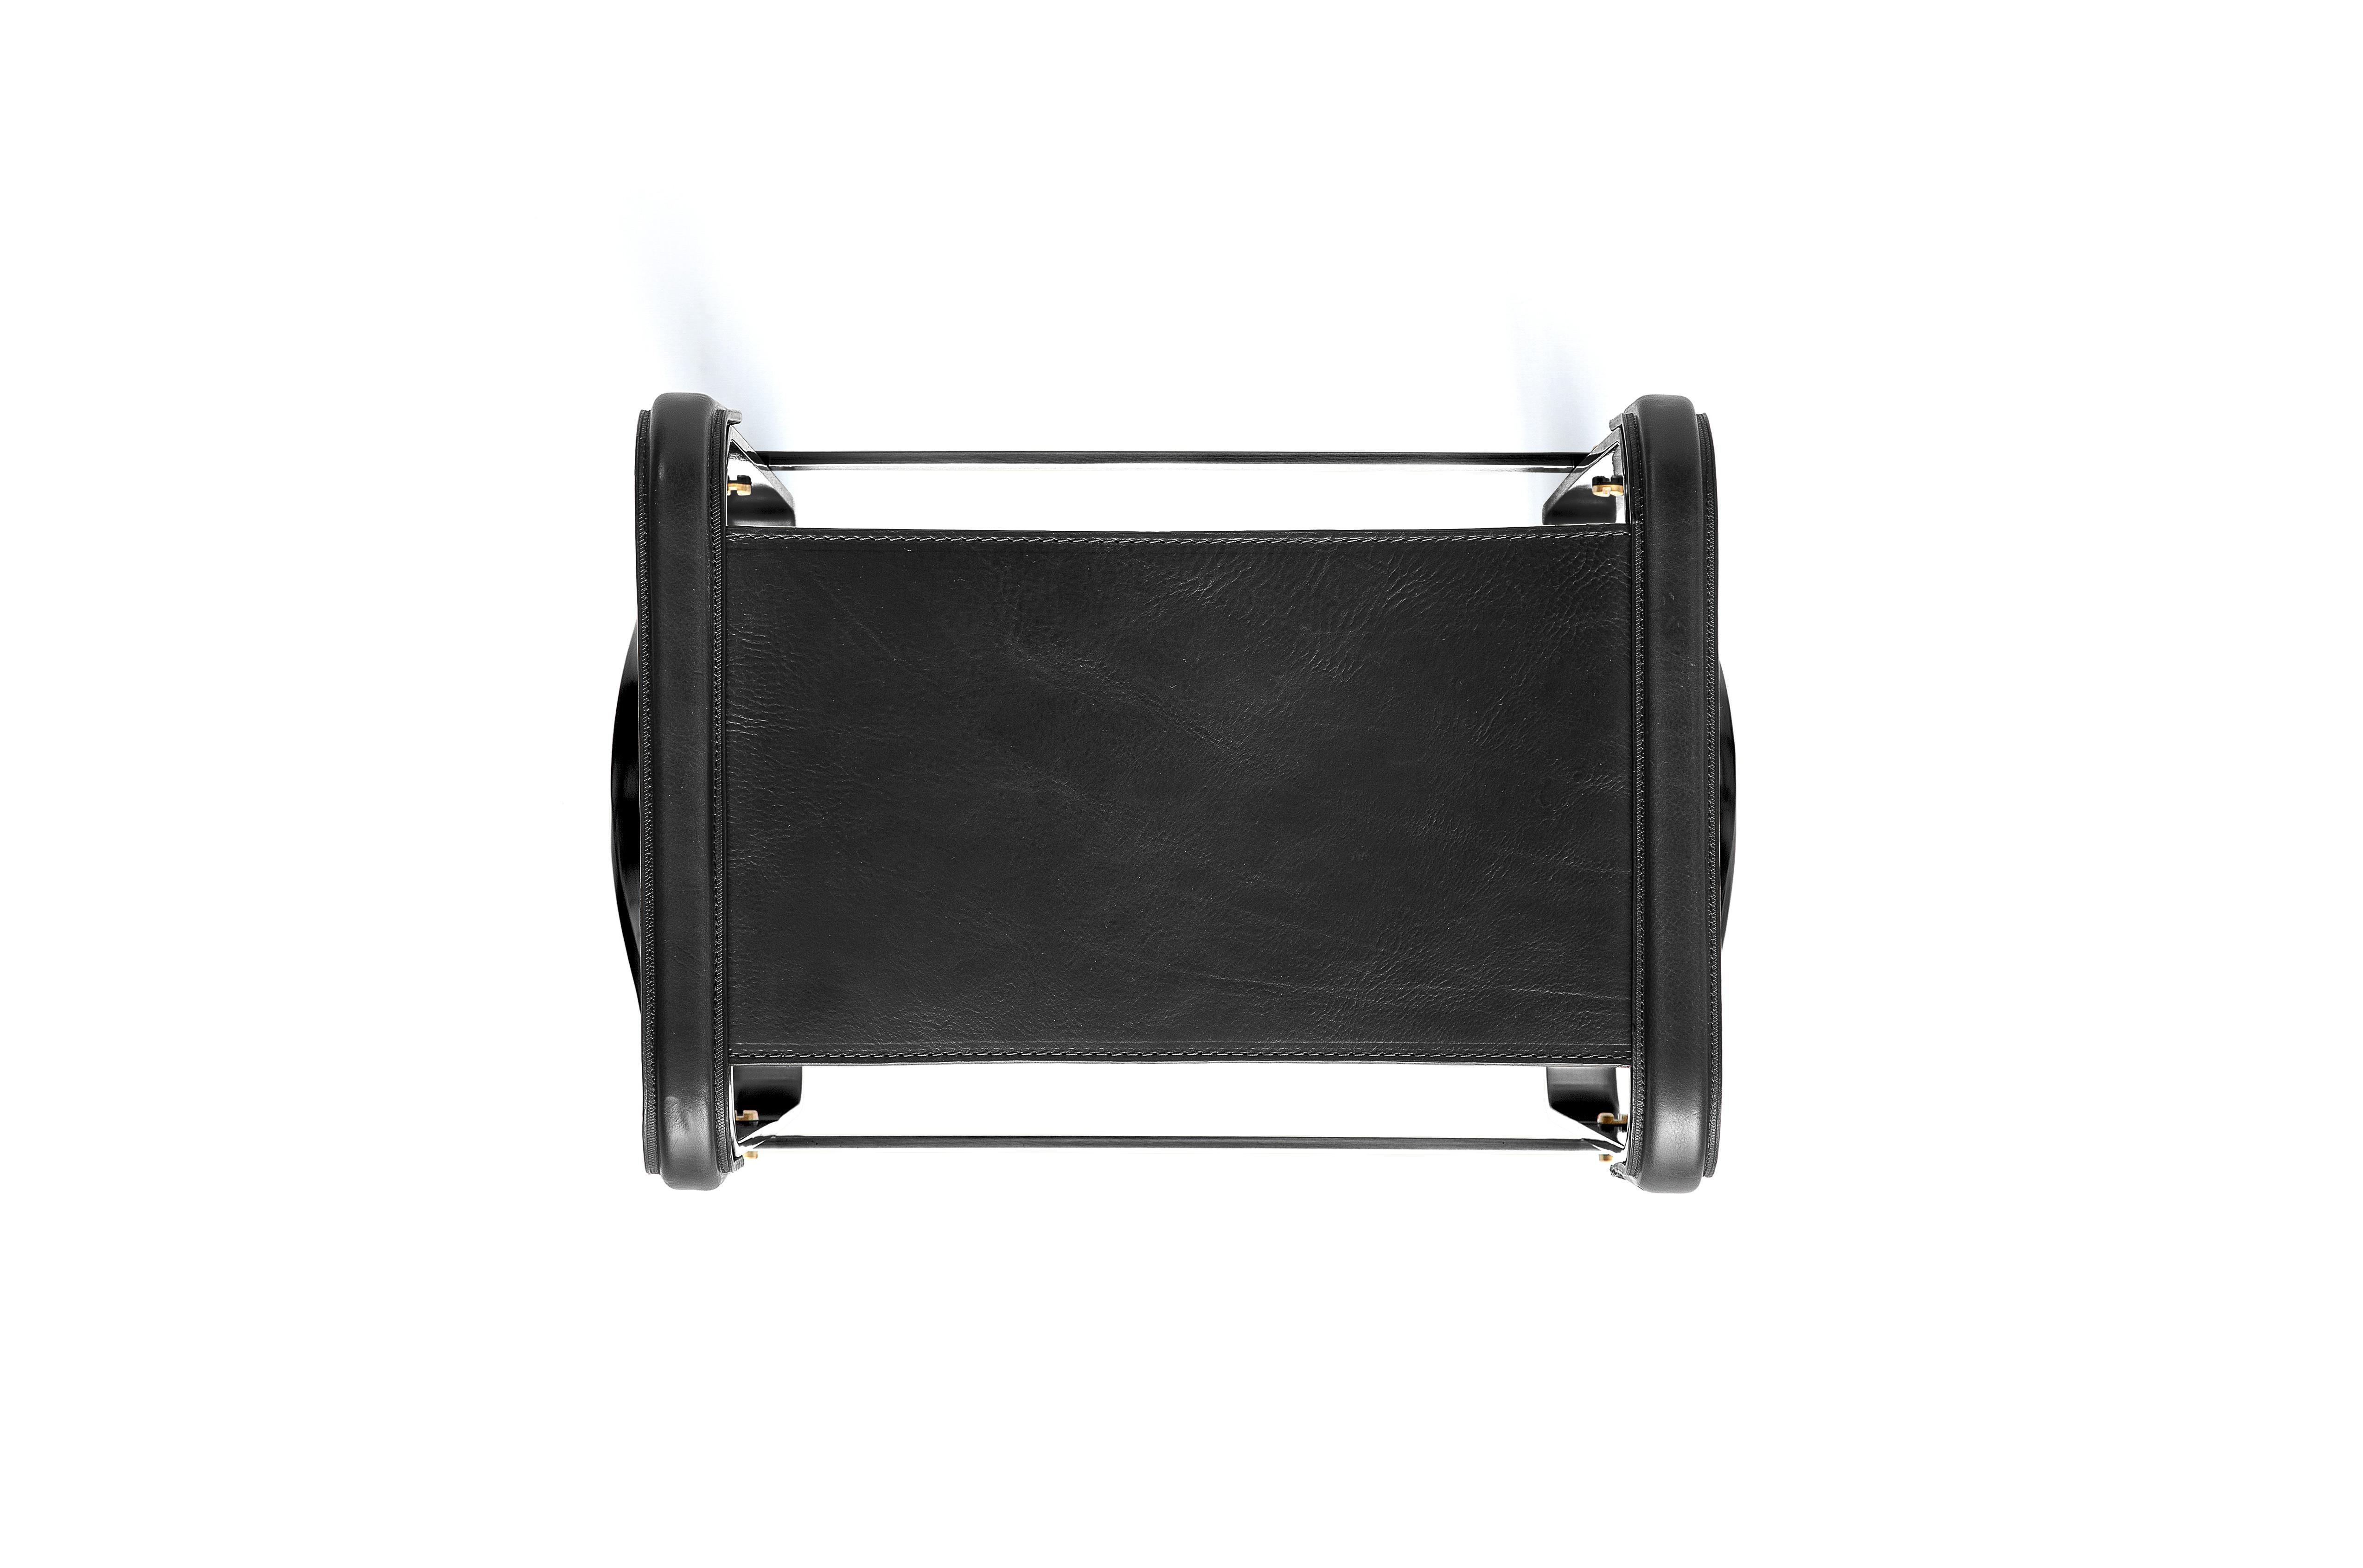 Spanish Footstool Black Smoke Steel & Black Leather, Contemporary Style Sample For Sale